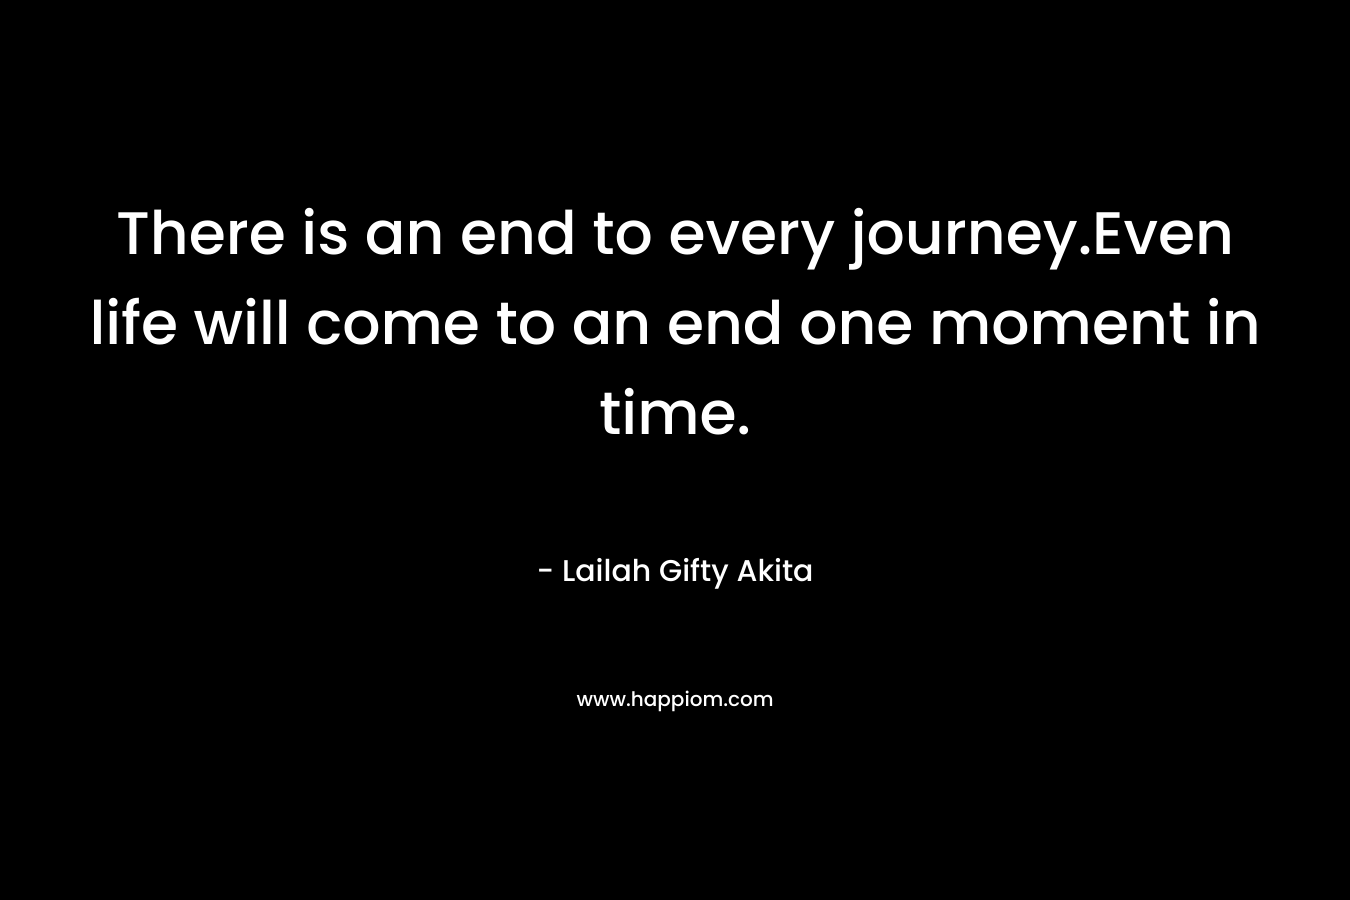 There is an end to every journey.Even life will come to an end one moment in time.